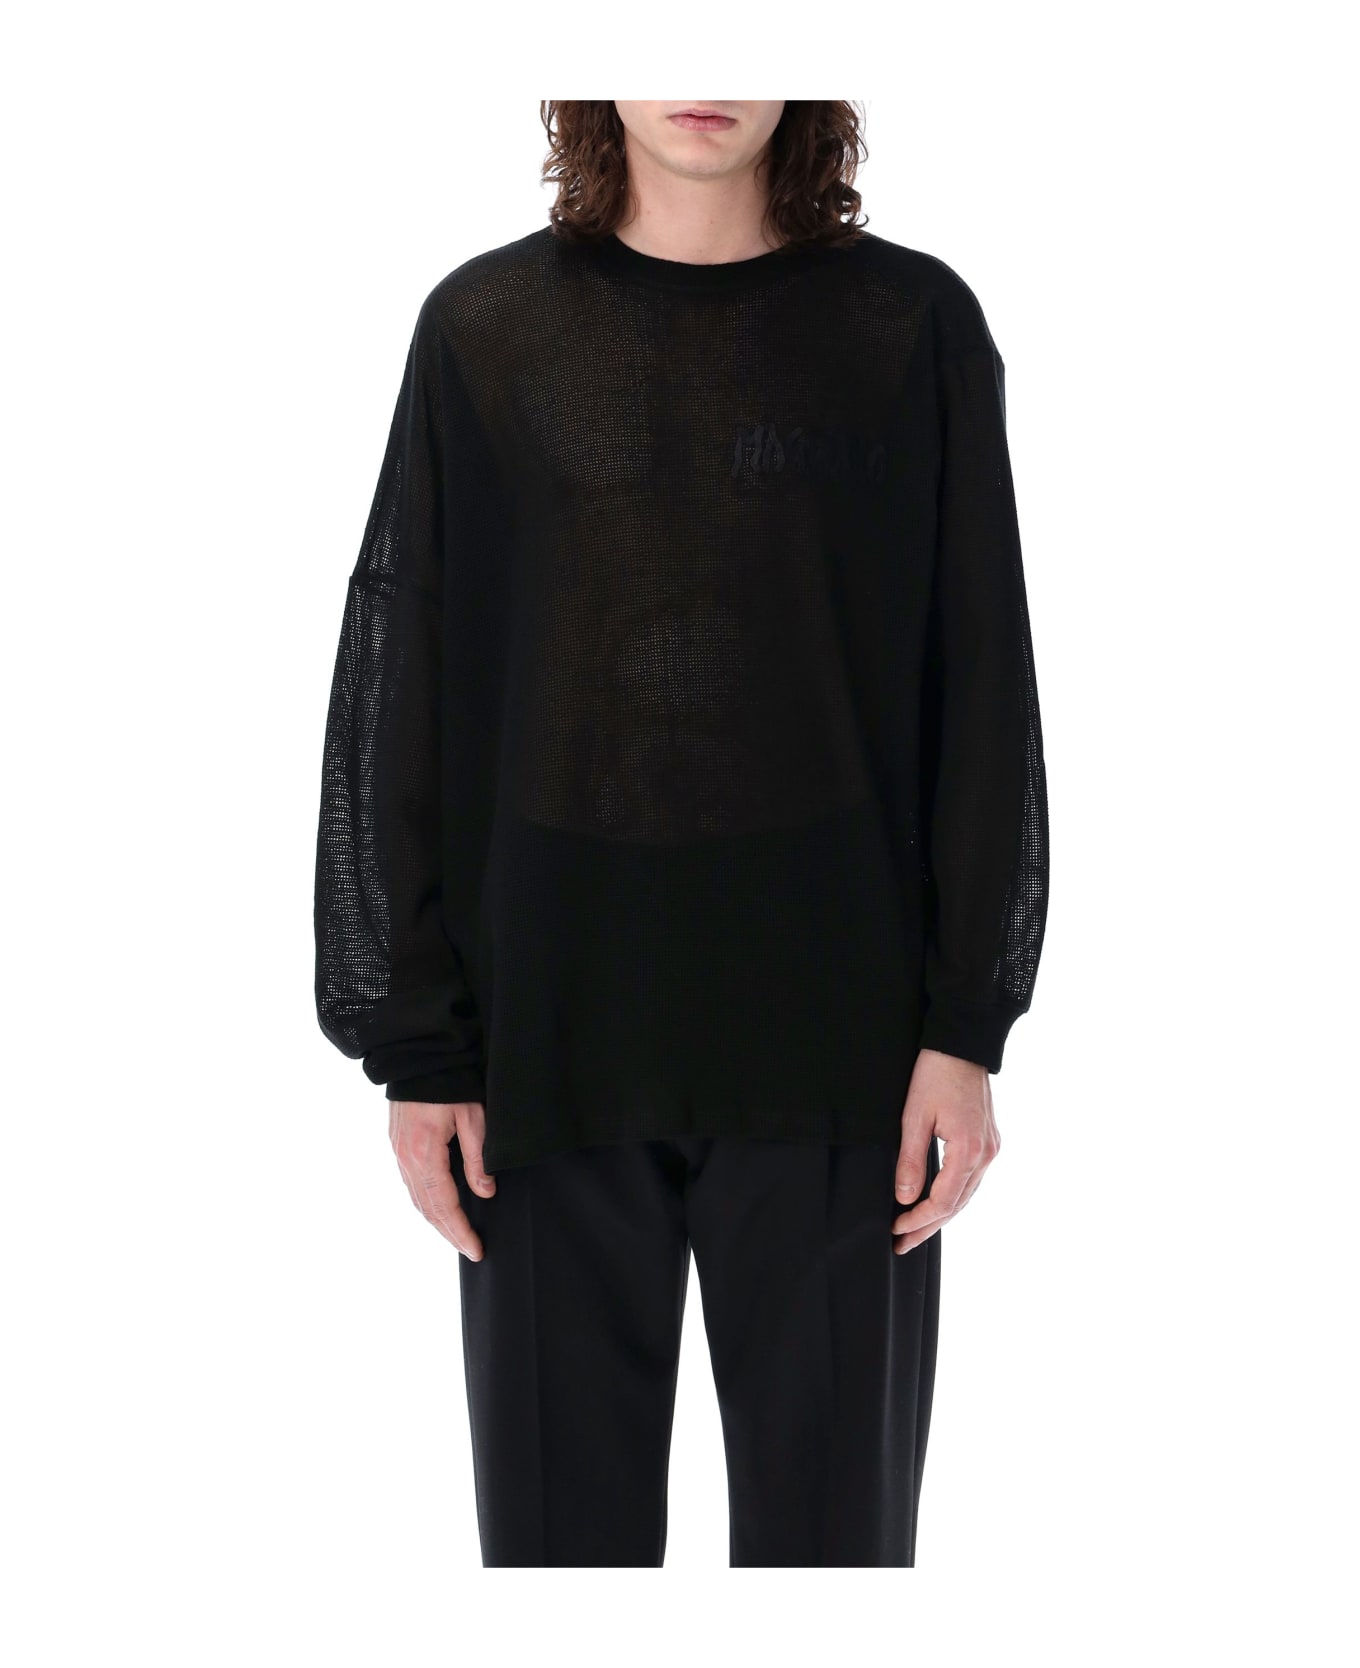 Magliano Knitted Sweater - BLACK